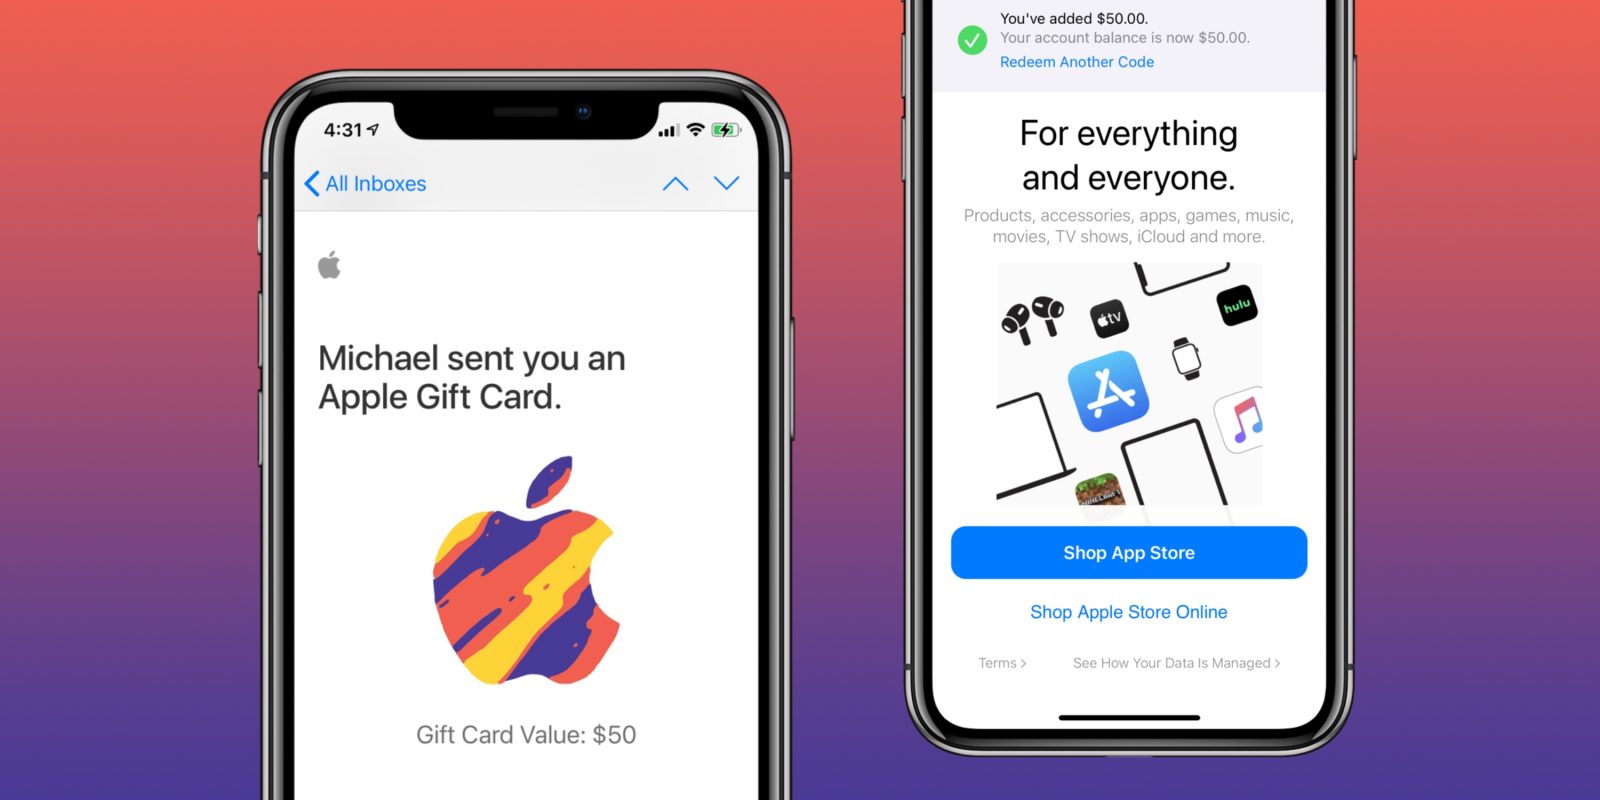 Apple Gift Card - App Store, iTunes, iPhone, iPad, AirPods, MacBook,  accessories and more